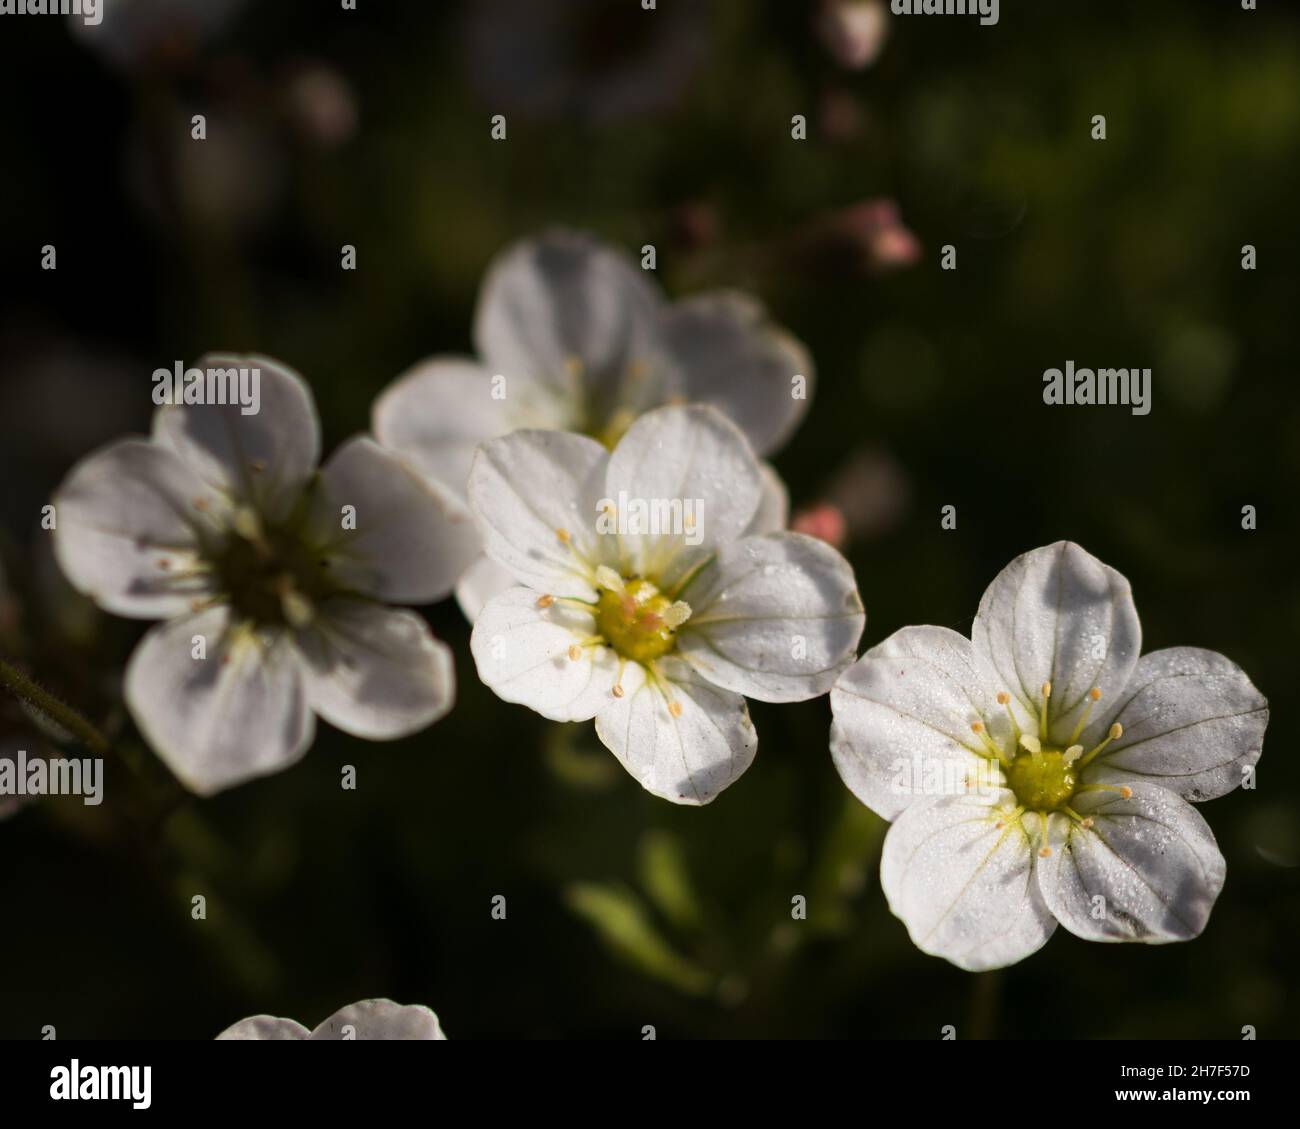 Closeup of Saxifraga rosacea flowers blooming in the garden Stock Photo